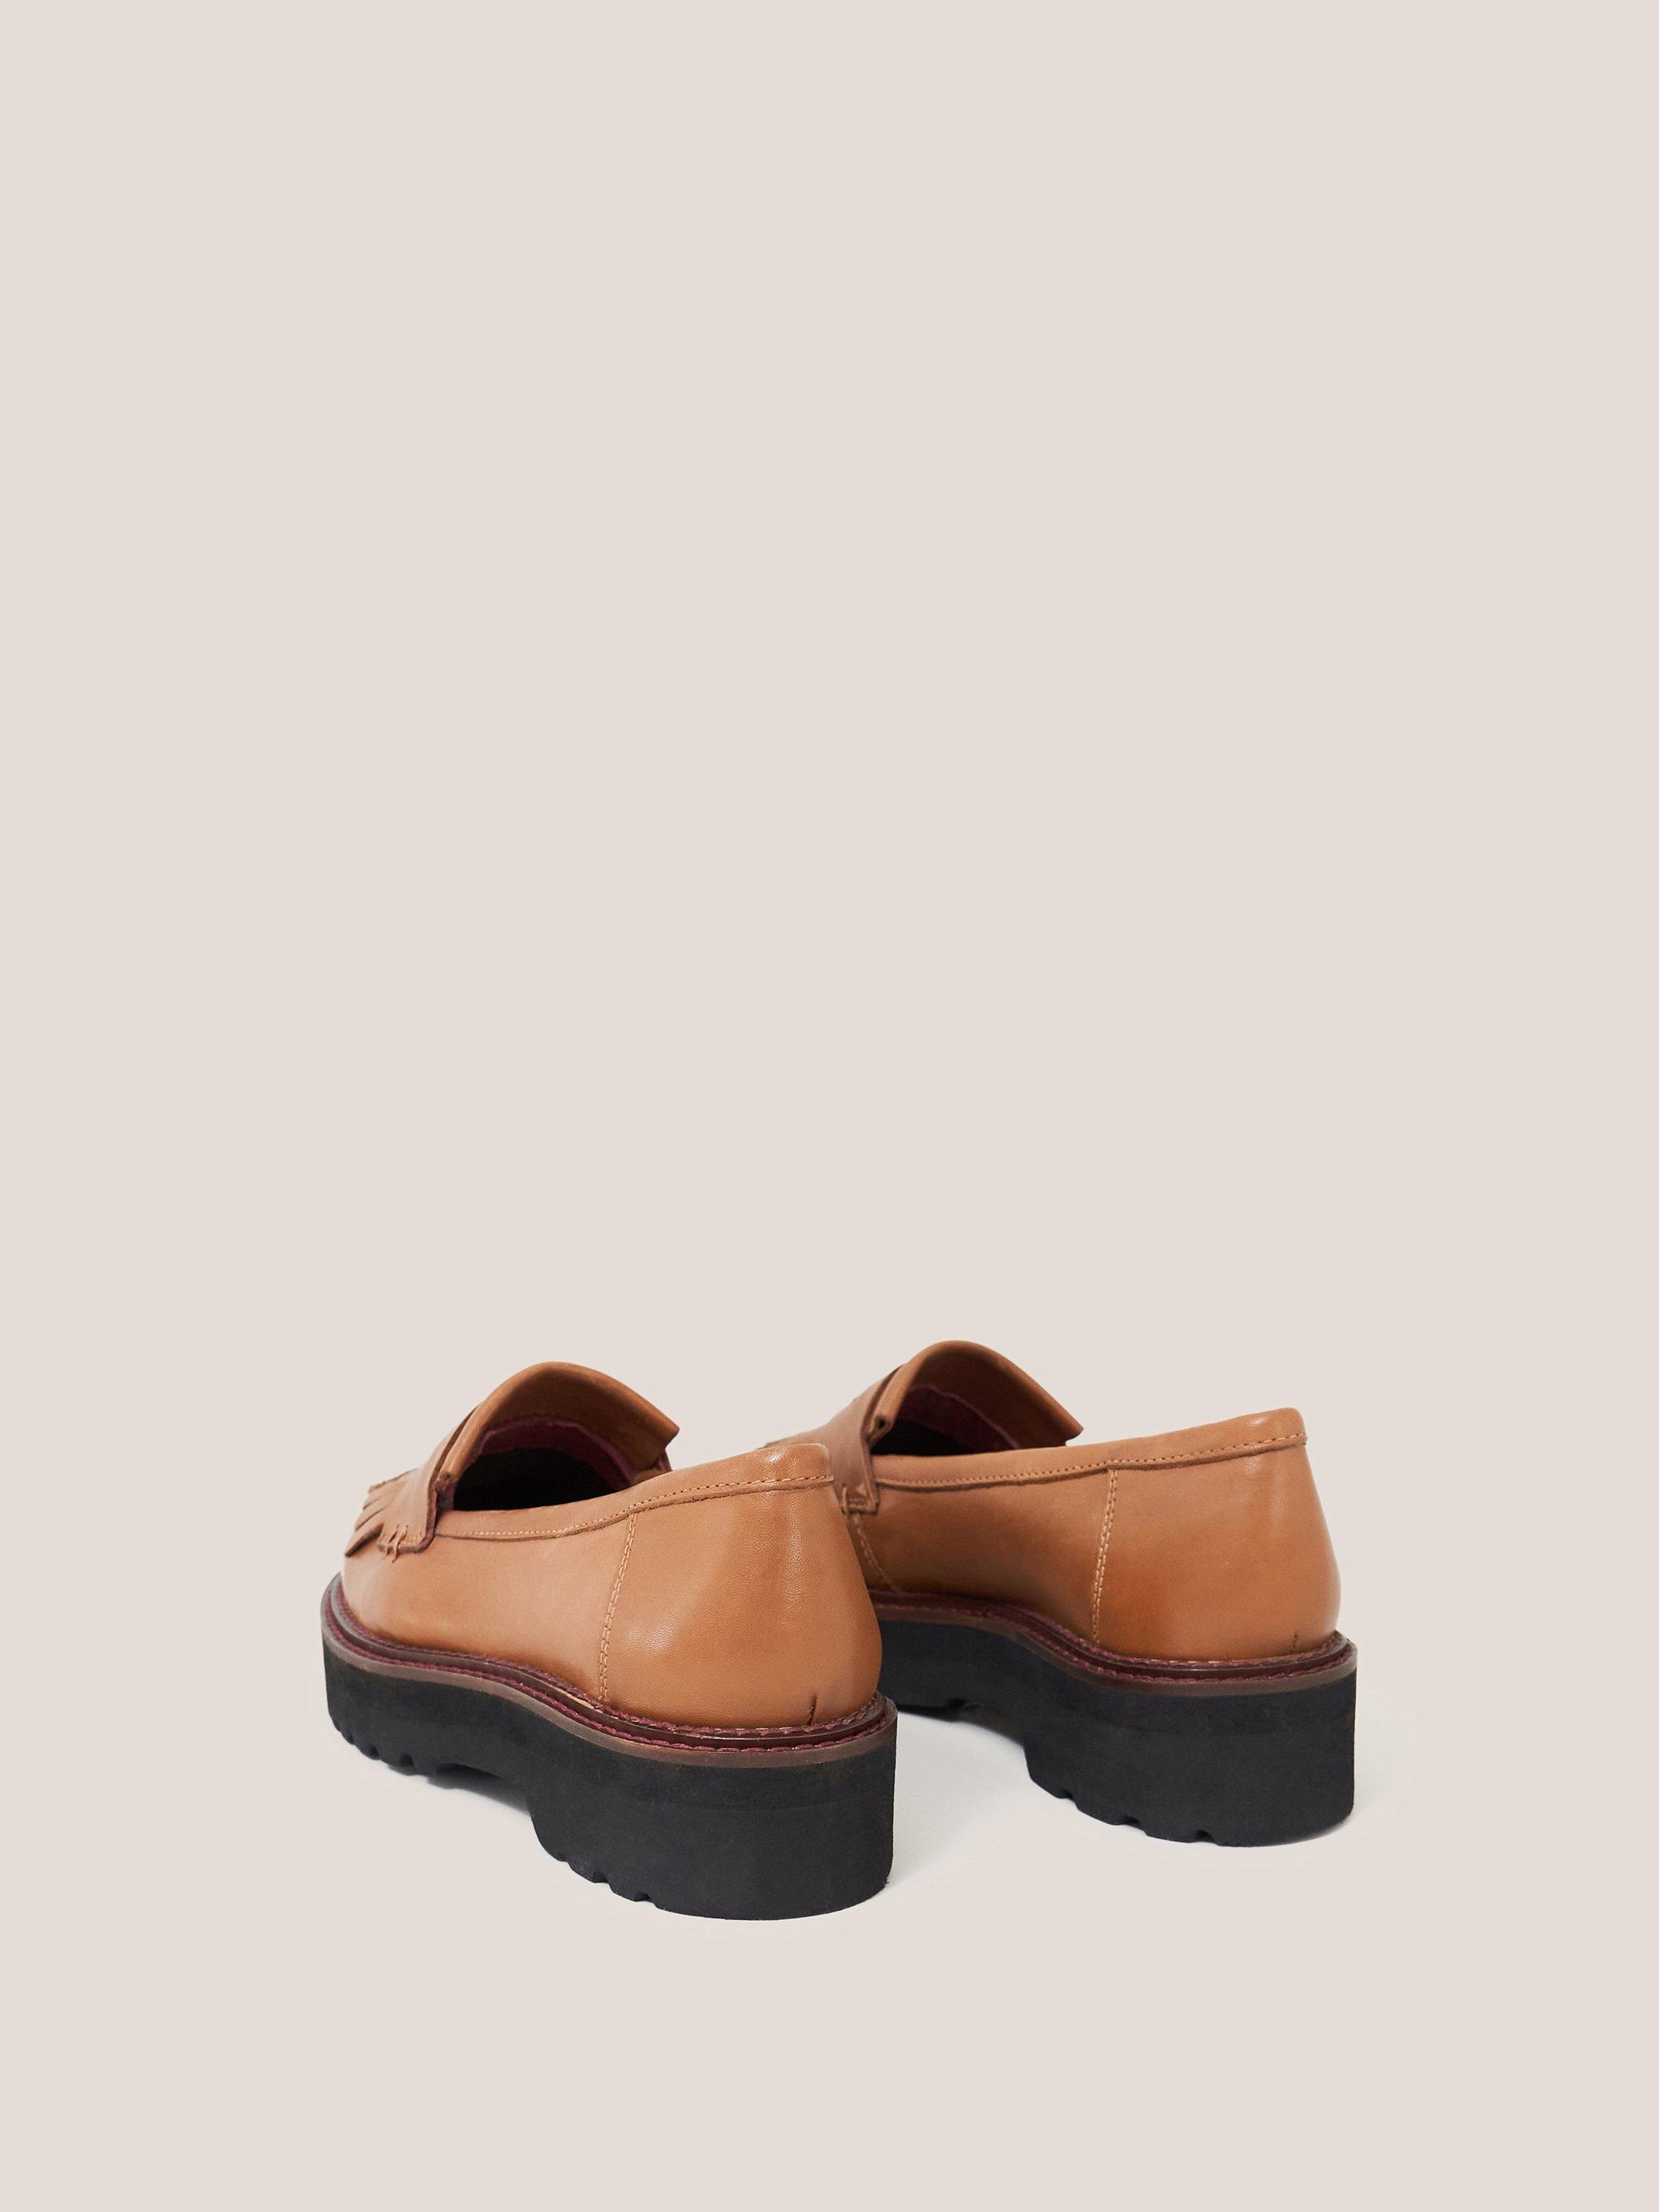 Elva Chunky Leather Loafer in TAN MULTI - FLAT BACK